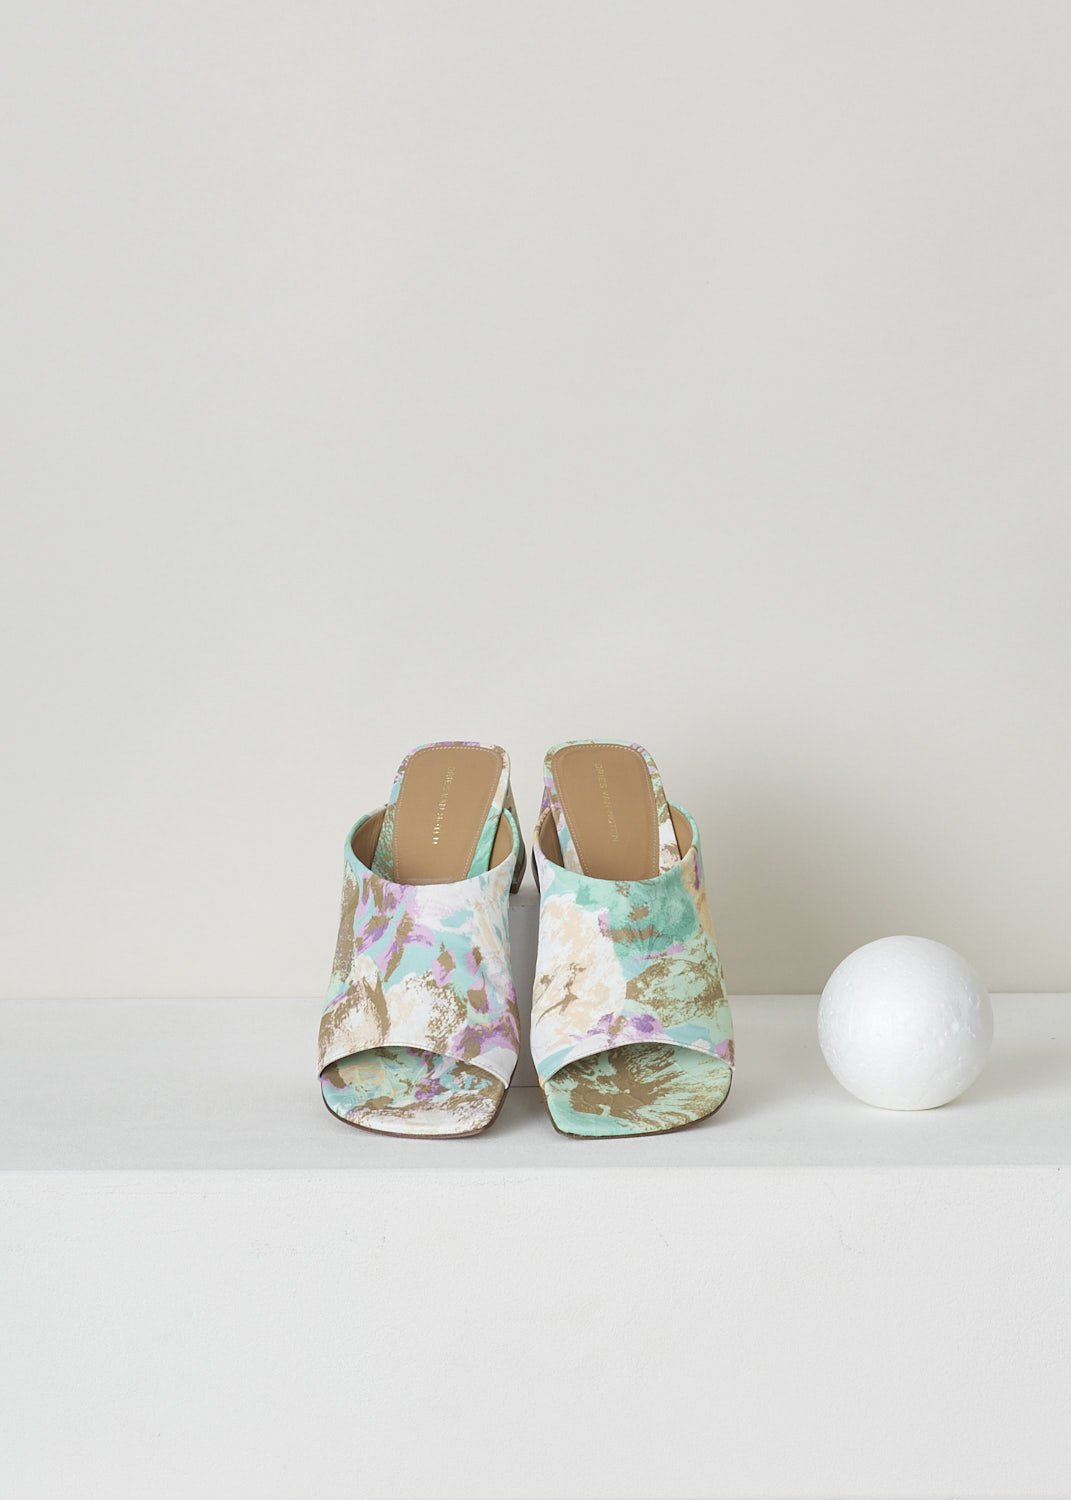 DRIES VAN NOTEN, MULTICOLOR MULES WITH BLOCK HEEL, WS231_285_QU704_DES_A975, Print, Green, Purple, Top, These heeled slip-on mules have a multicolored print with green, pink and beige hues. These mules have a square open-toe front and a block heel. 

